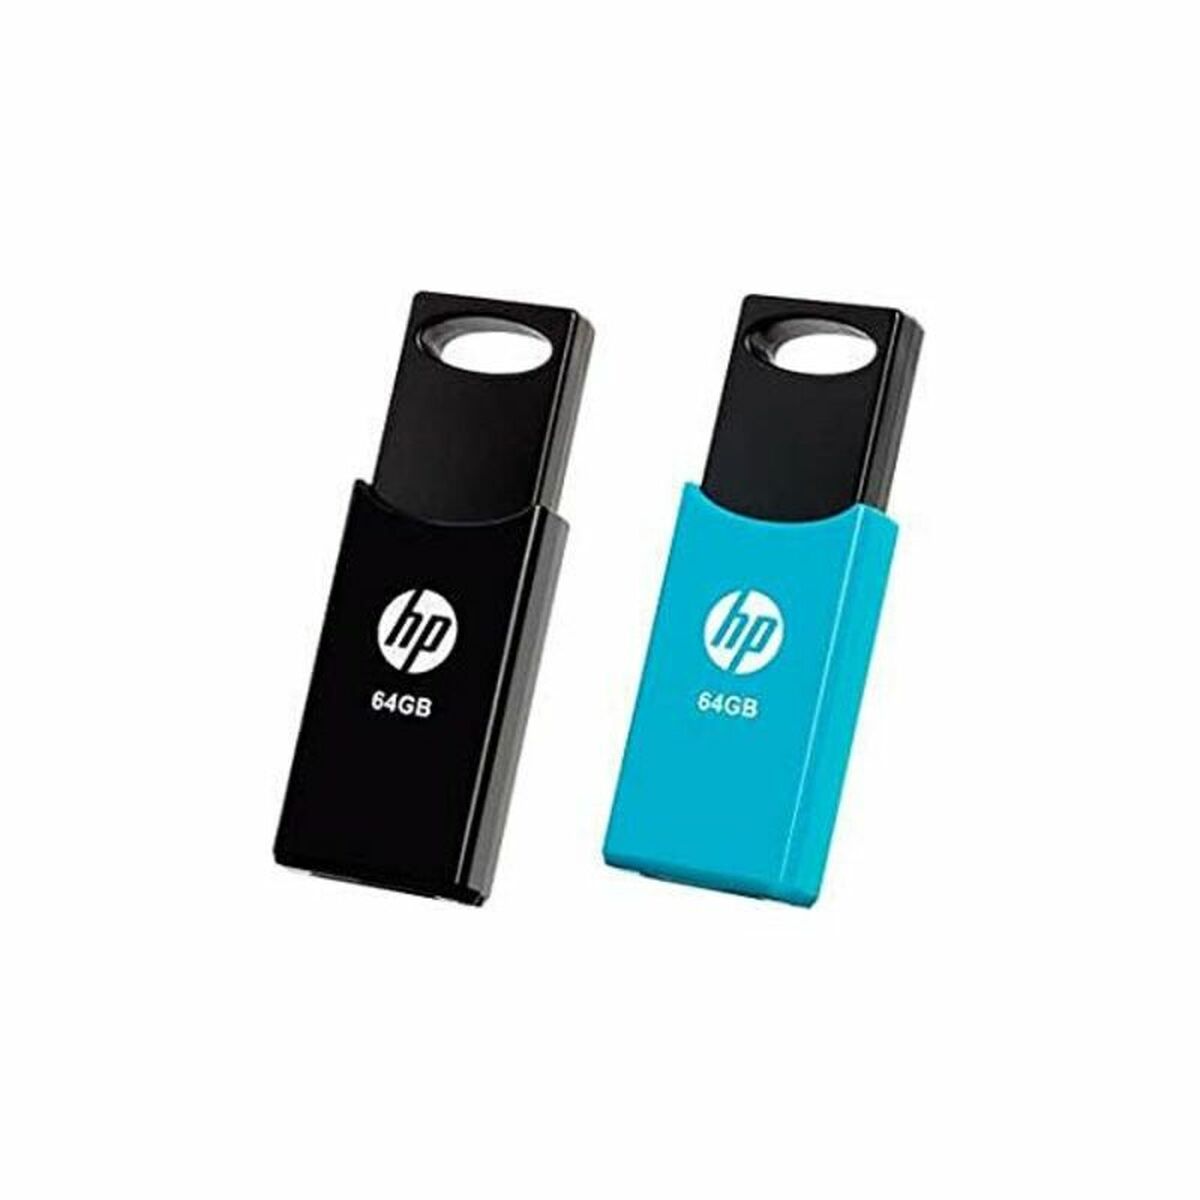 USB stick HP 212 USB 2.0 (2 uds), HP, Computing, Data storage, usb-stick-hp-212-usb-2-0-blue-black-2-uds, :32 GB, :64 GB, Brand_HP, Capacity_32 GB, Capacity_64 GB, category-reference-2609, category-reference-2803, category-reference-2817, category-reference-t-19685, category-reference-t-19909, category-reference-t-21355, computers / components, Condition_NEW, Price_20 - 50, Teleworking, RiotNook